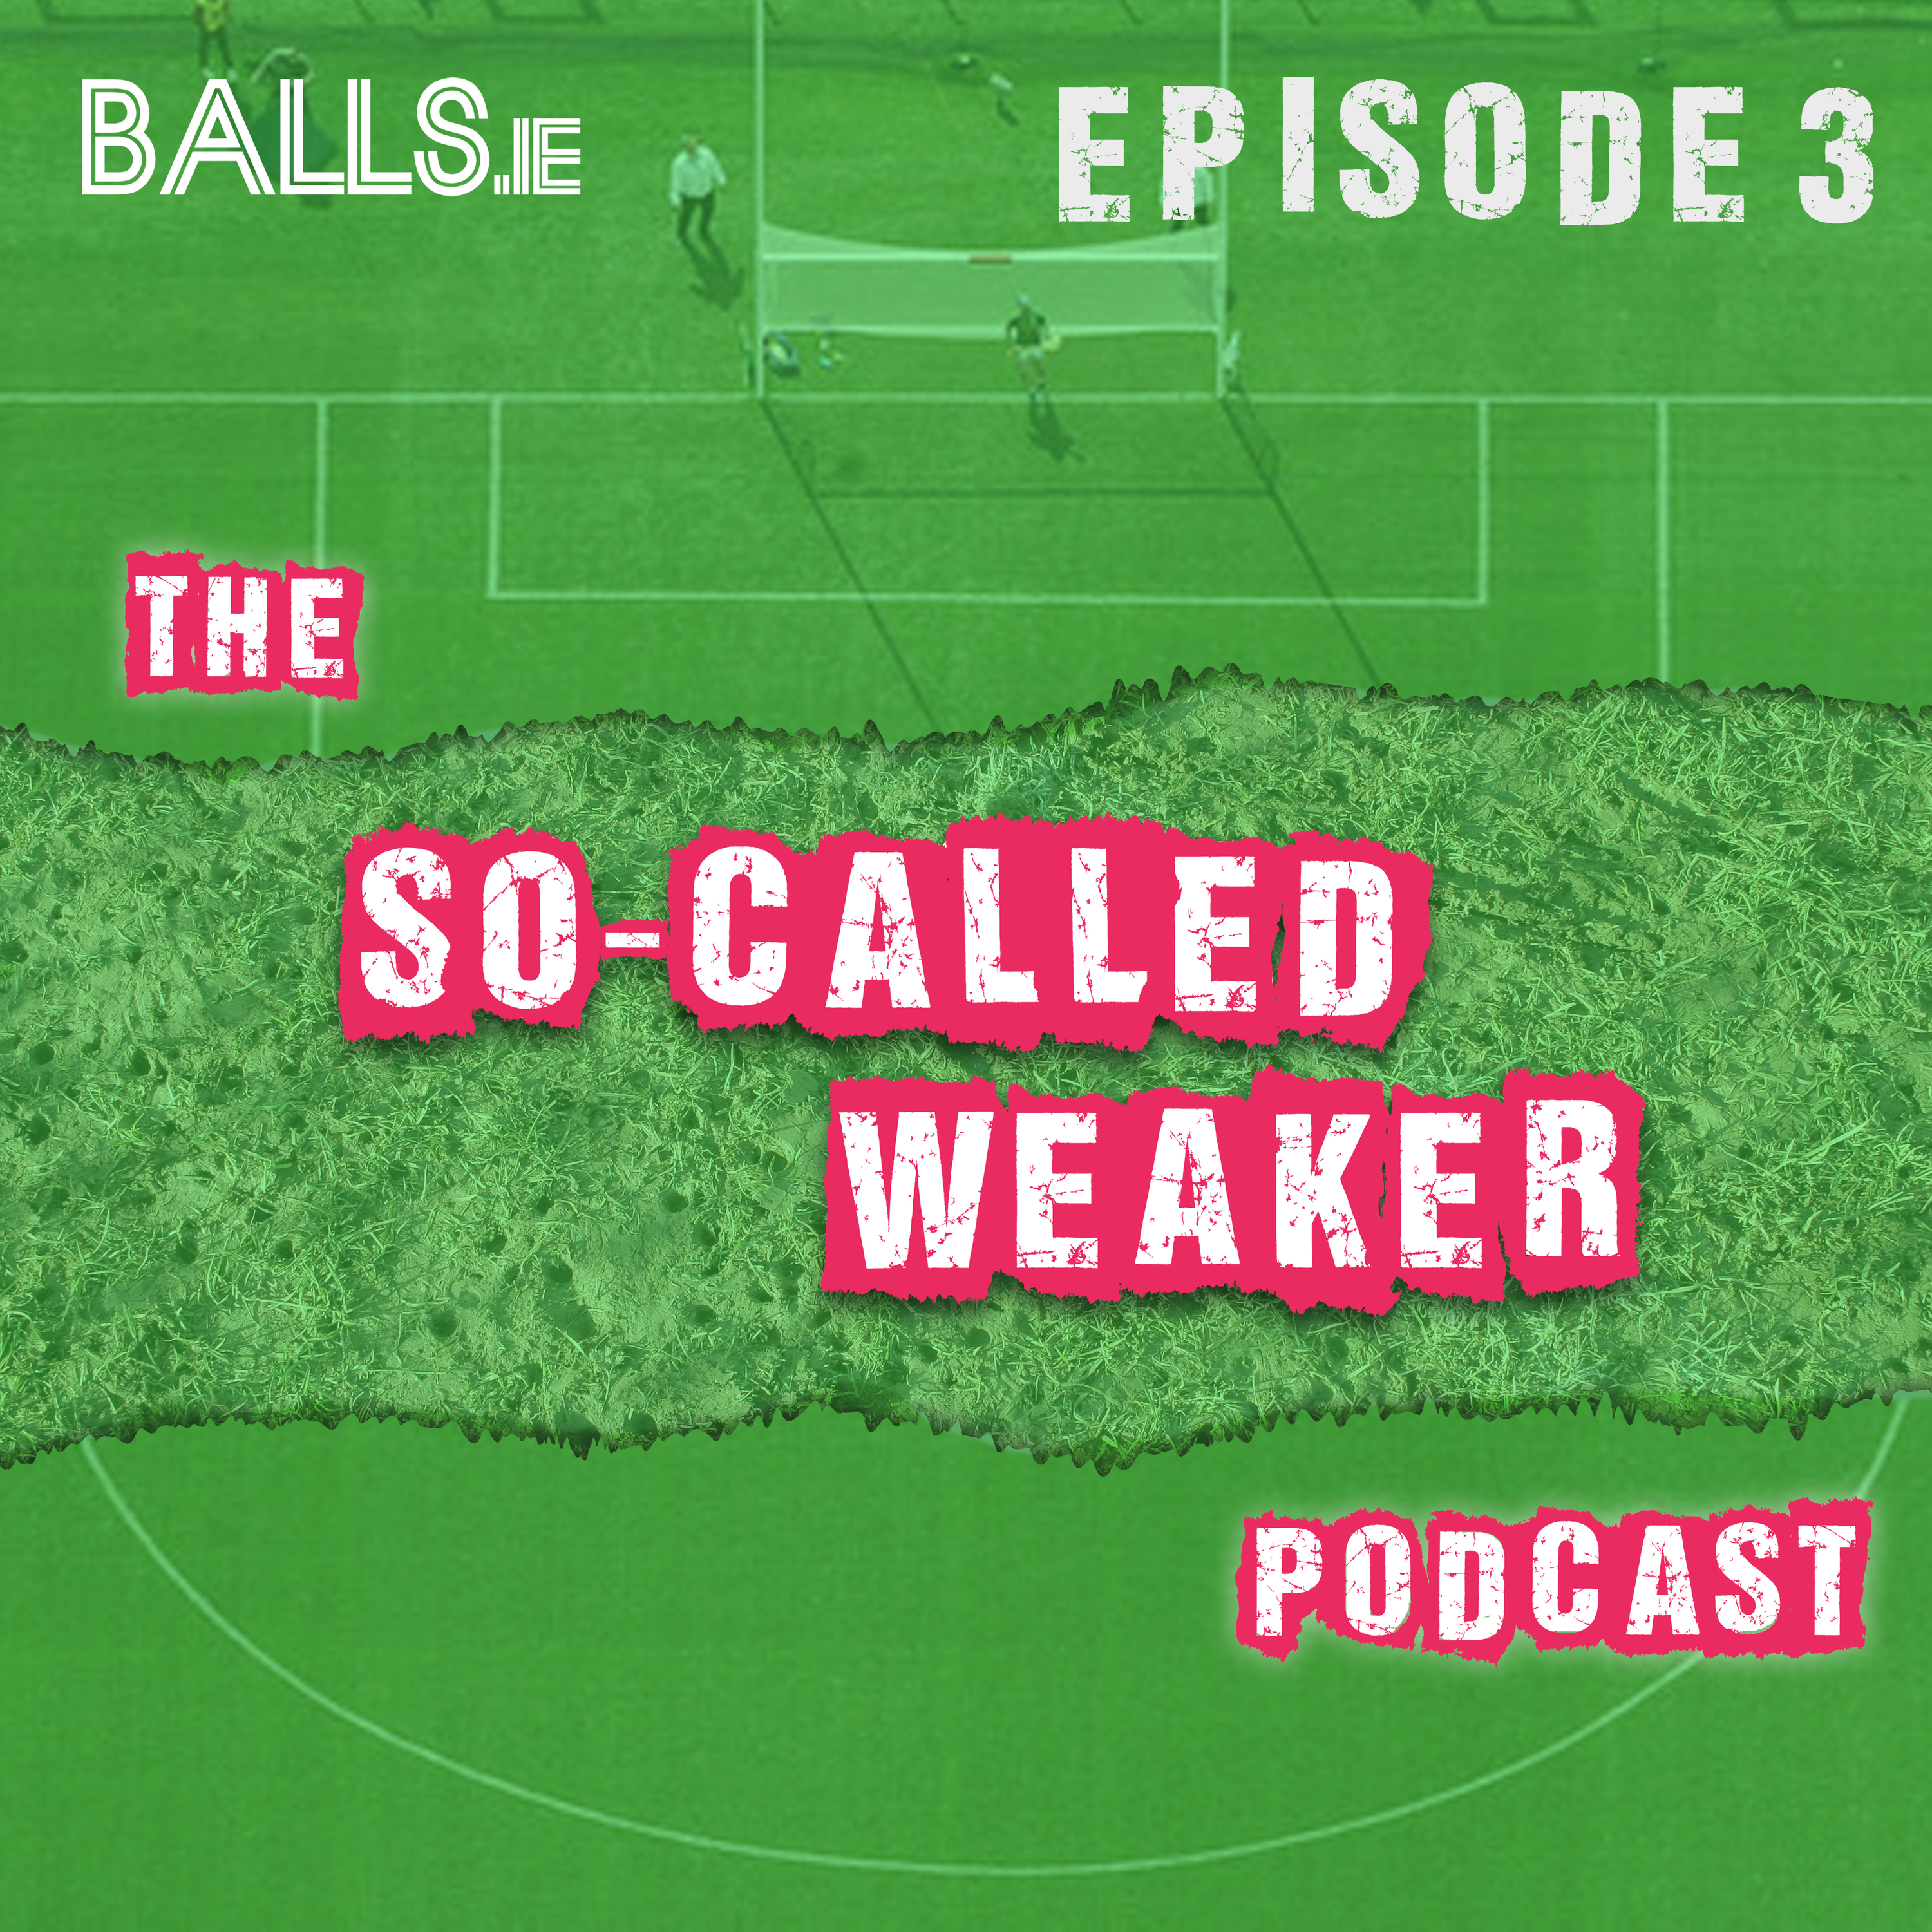 The So-Called Weaker Podcast (Ep 3) - Ciaran Deely & Declan Bogue